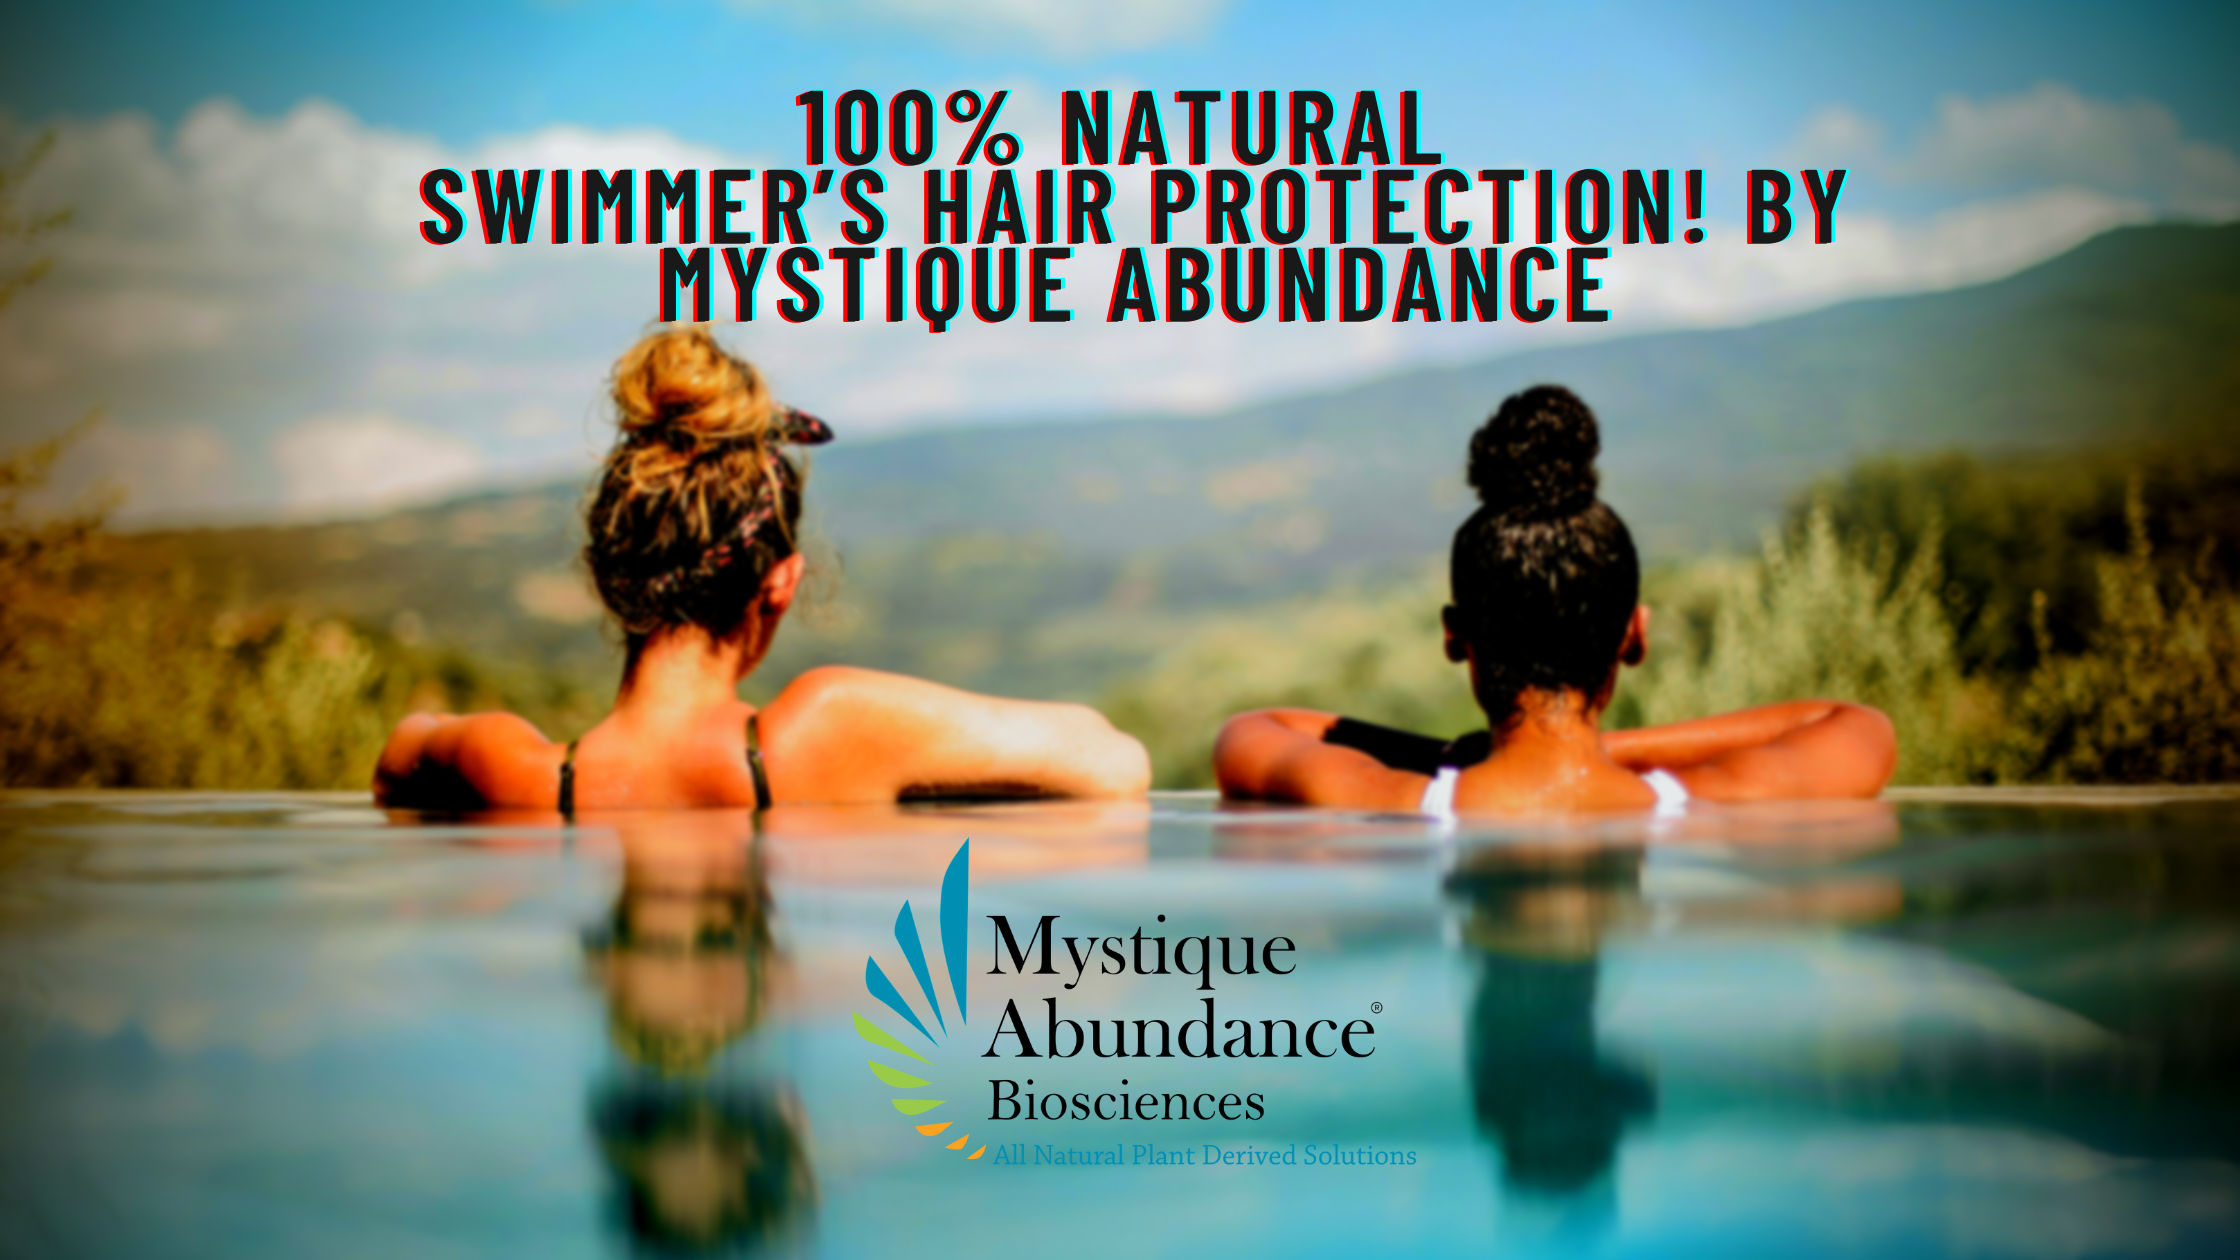 100% Natural Swimmer’s Hair Protection! by Mystique Abundance